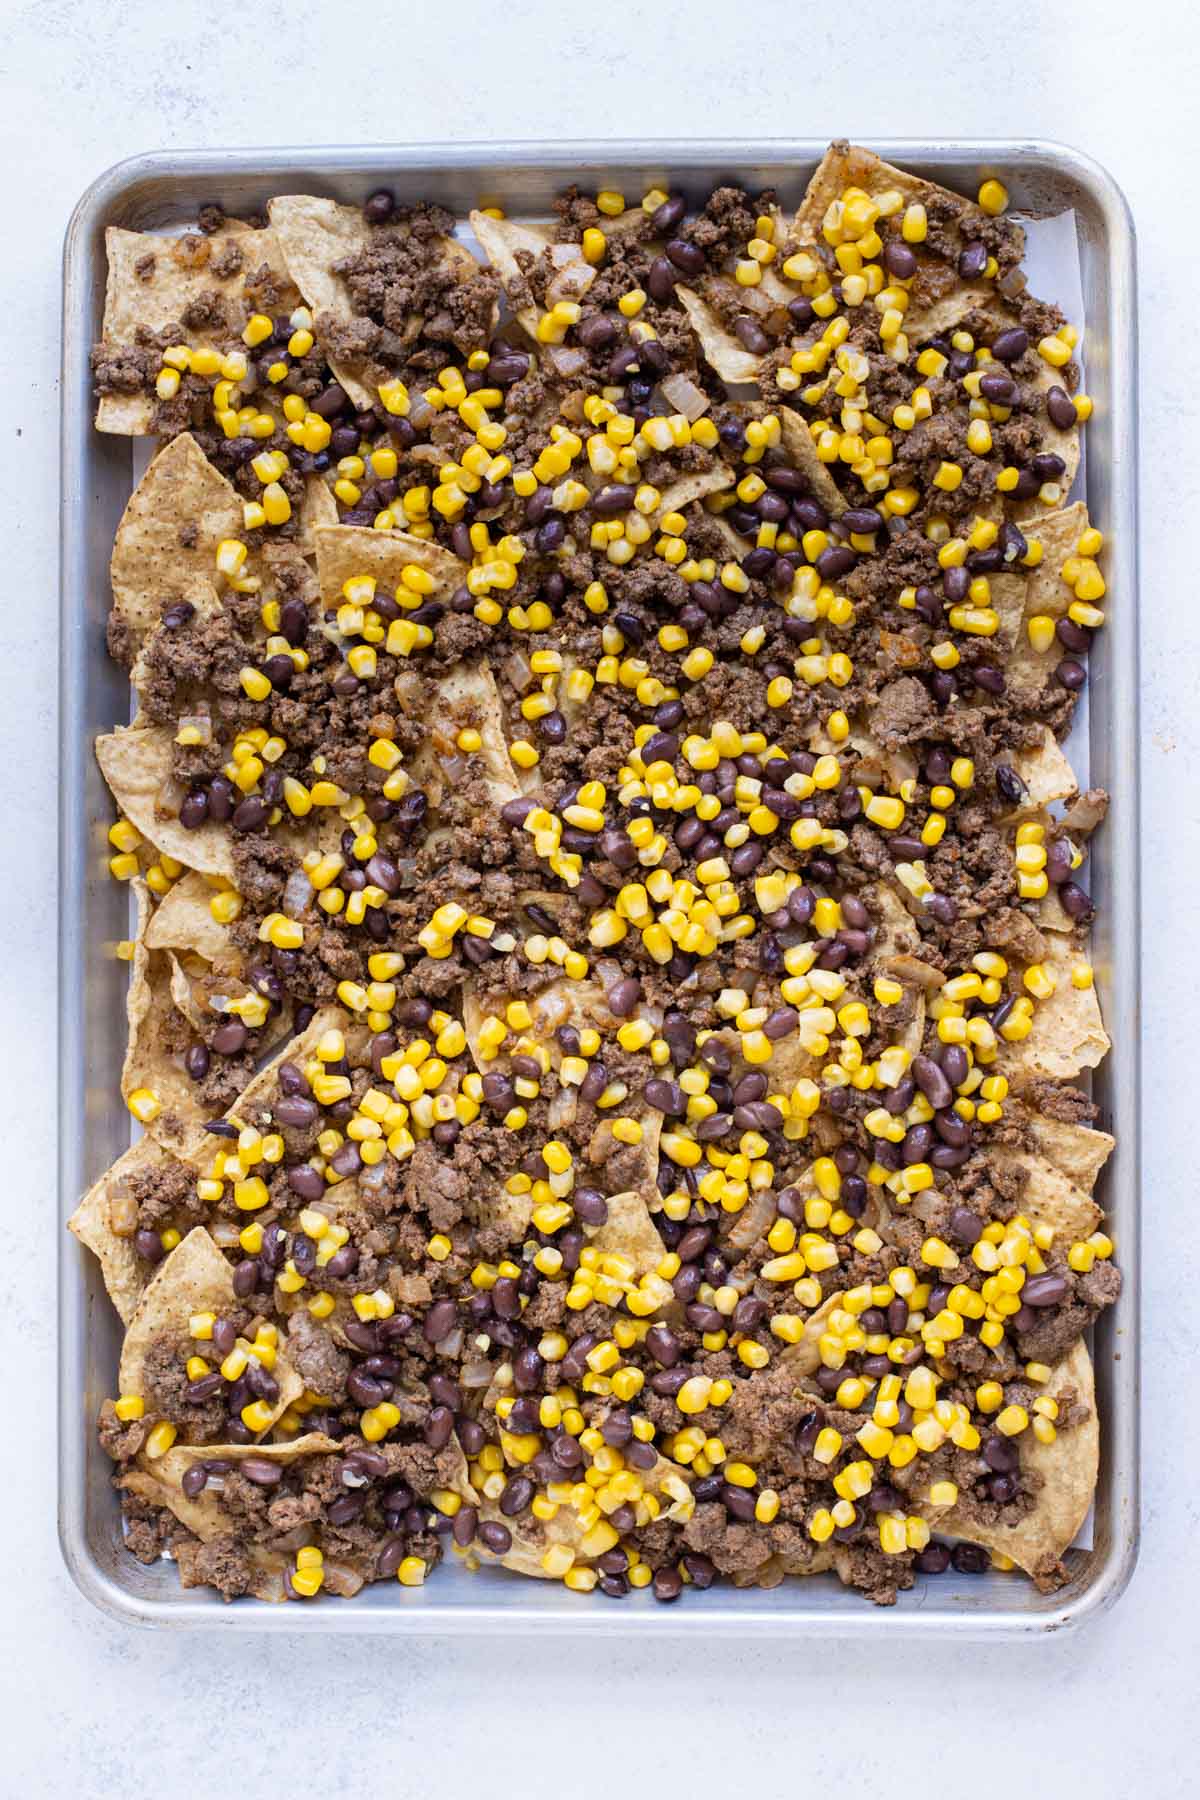 Chips and ground beef are topped with corn and beans on a baking sheet.